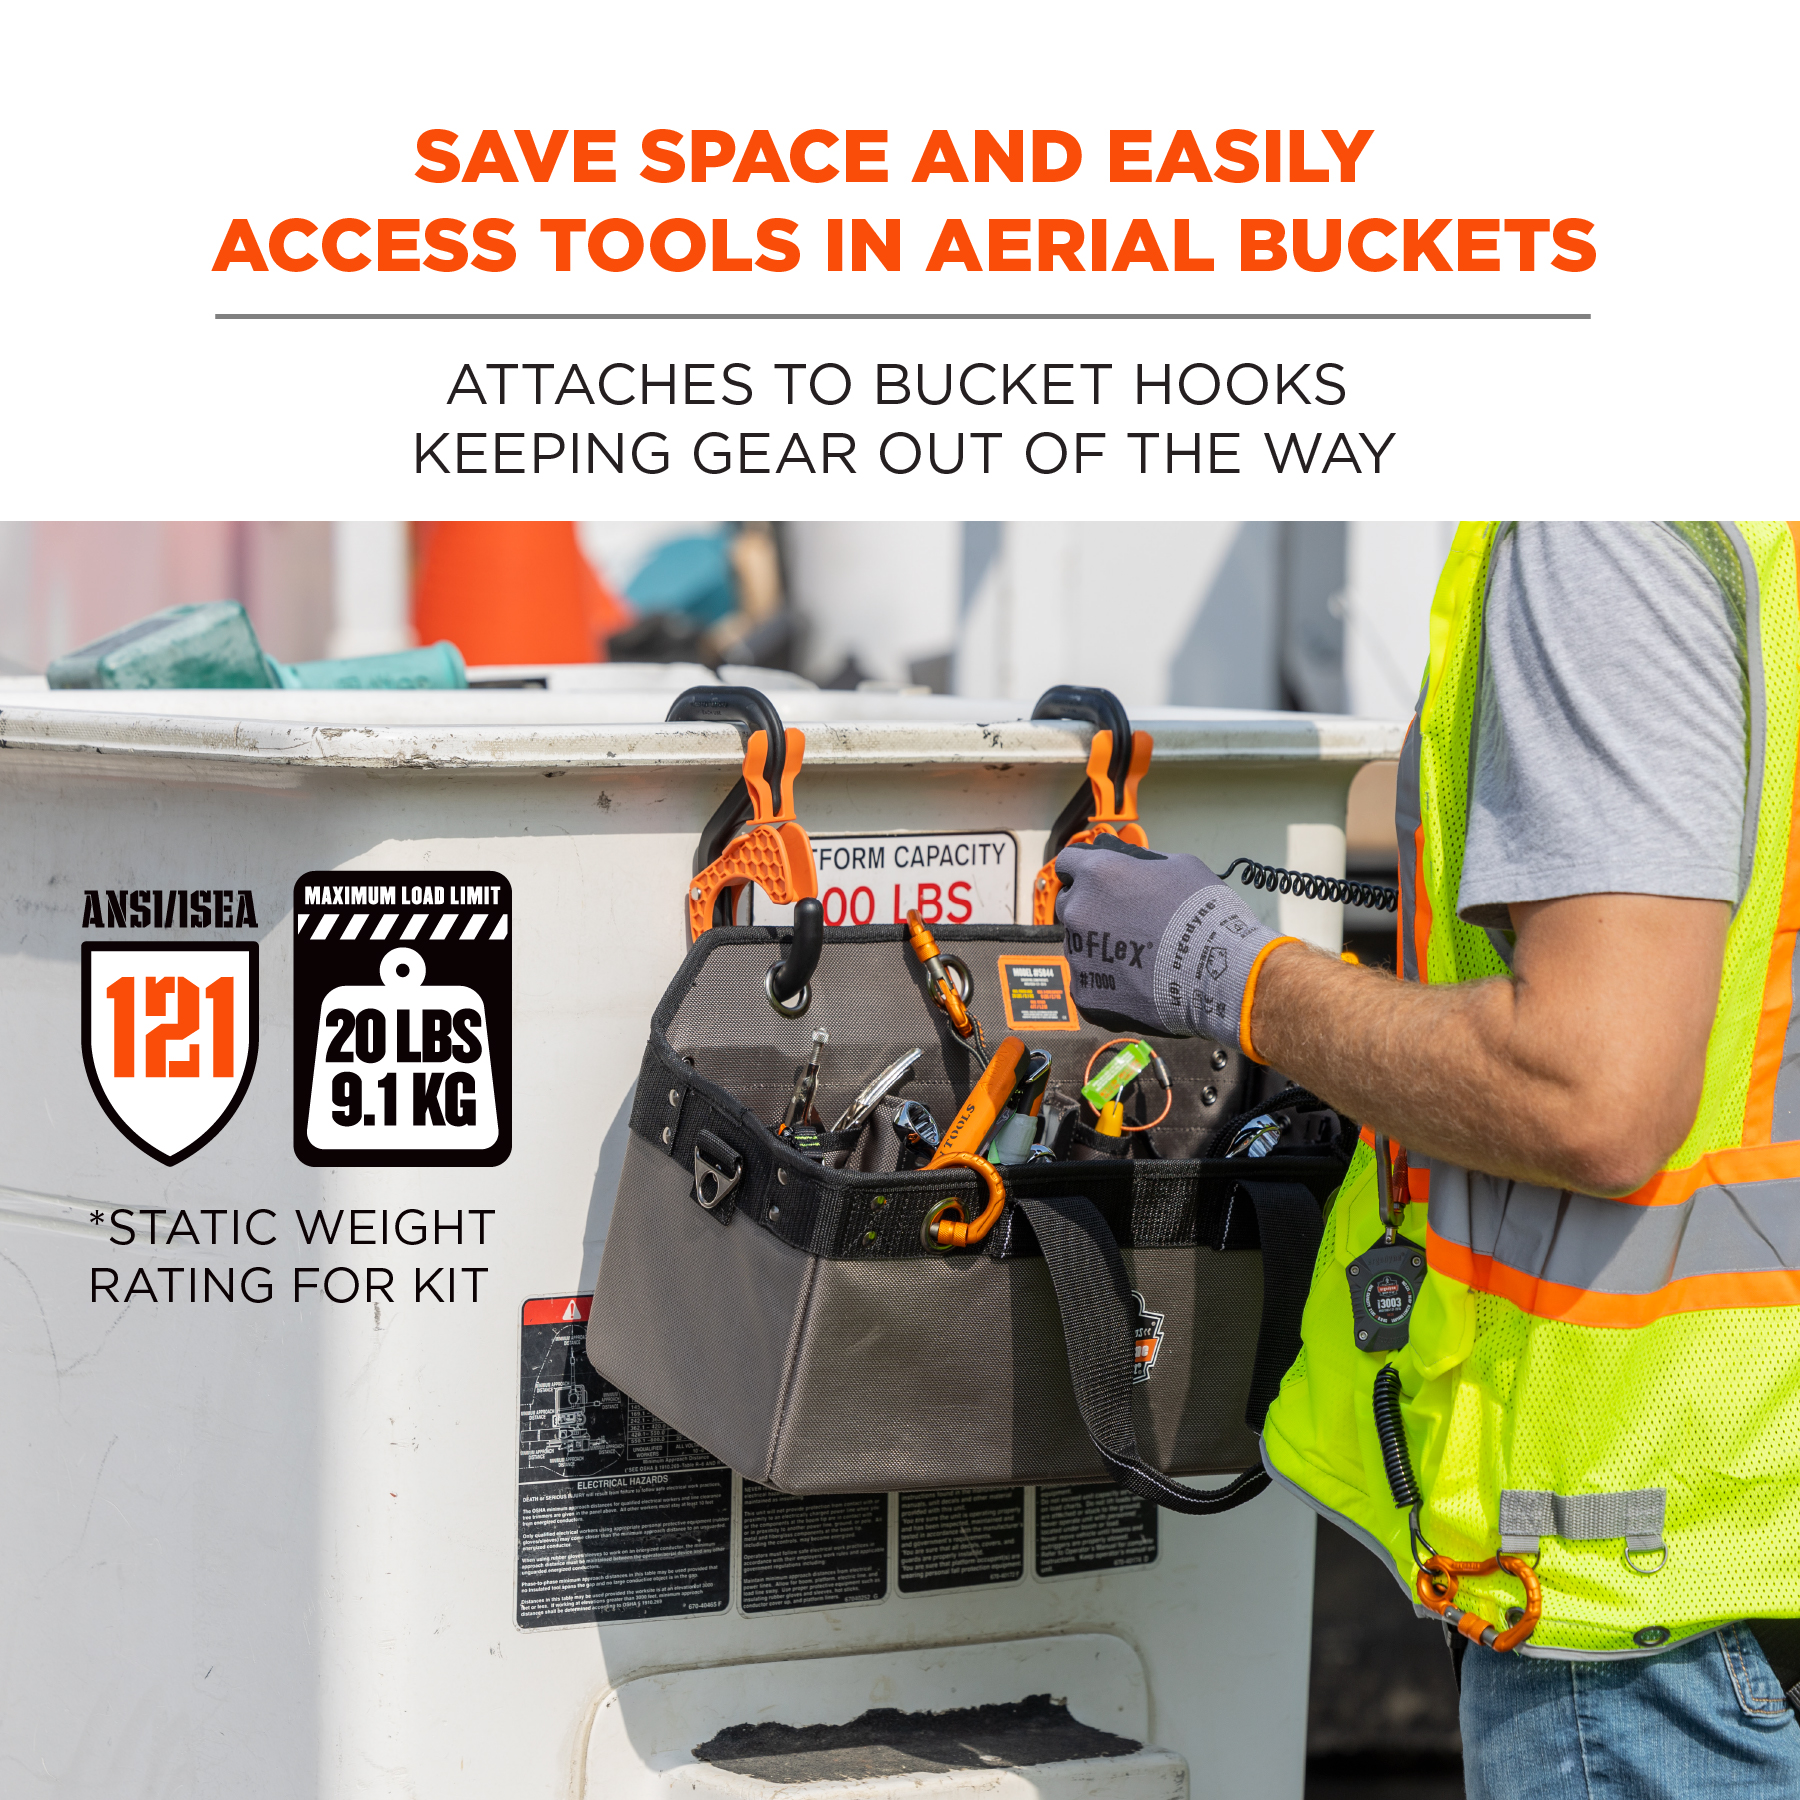 https://www.ergodyne.com/sites/default/files/product-images/13746-5846-bucket-truck-tool-bag-with-locking-aerial-bucket-hooks-kit-gray-save-space-and-easily-access-tools-in-aerial-buckets.jpg